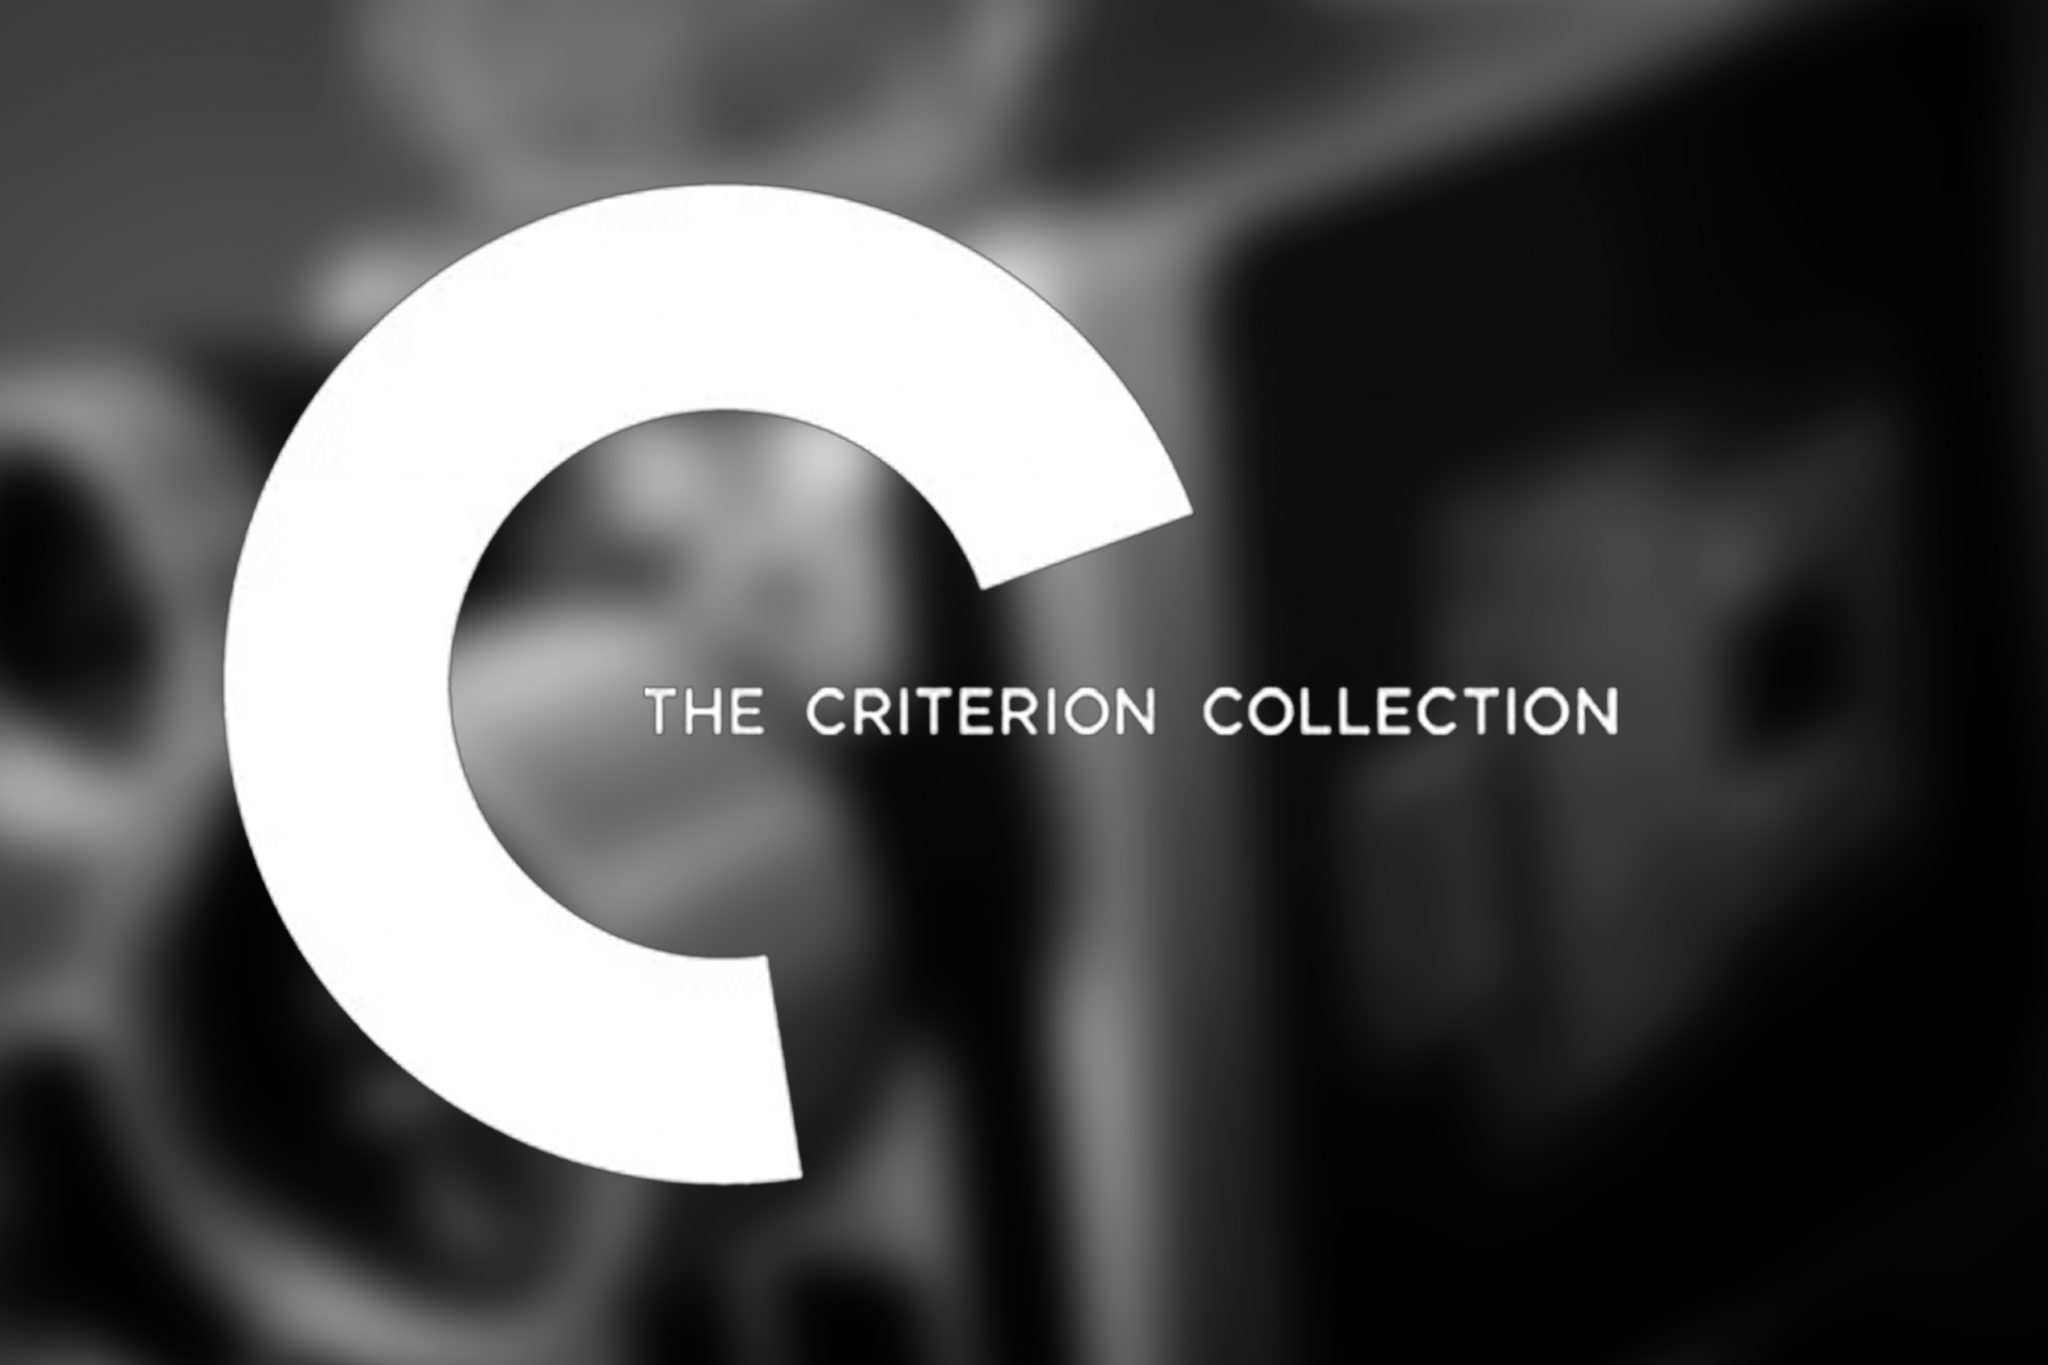 BFI Shop - The Criterion Collection - DVD & Blu-ray